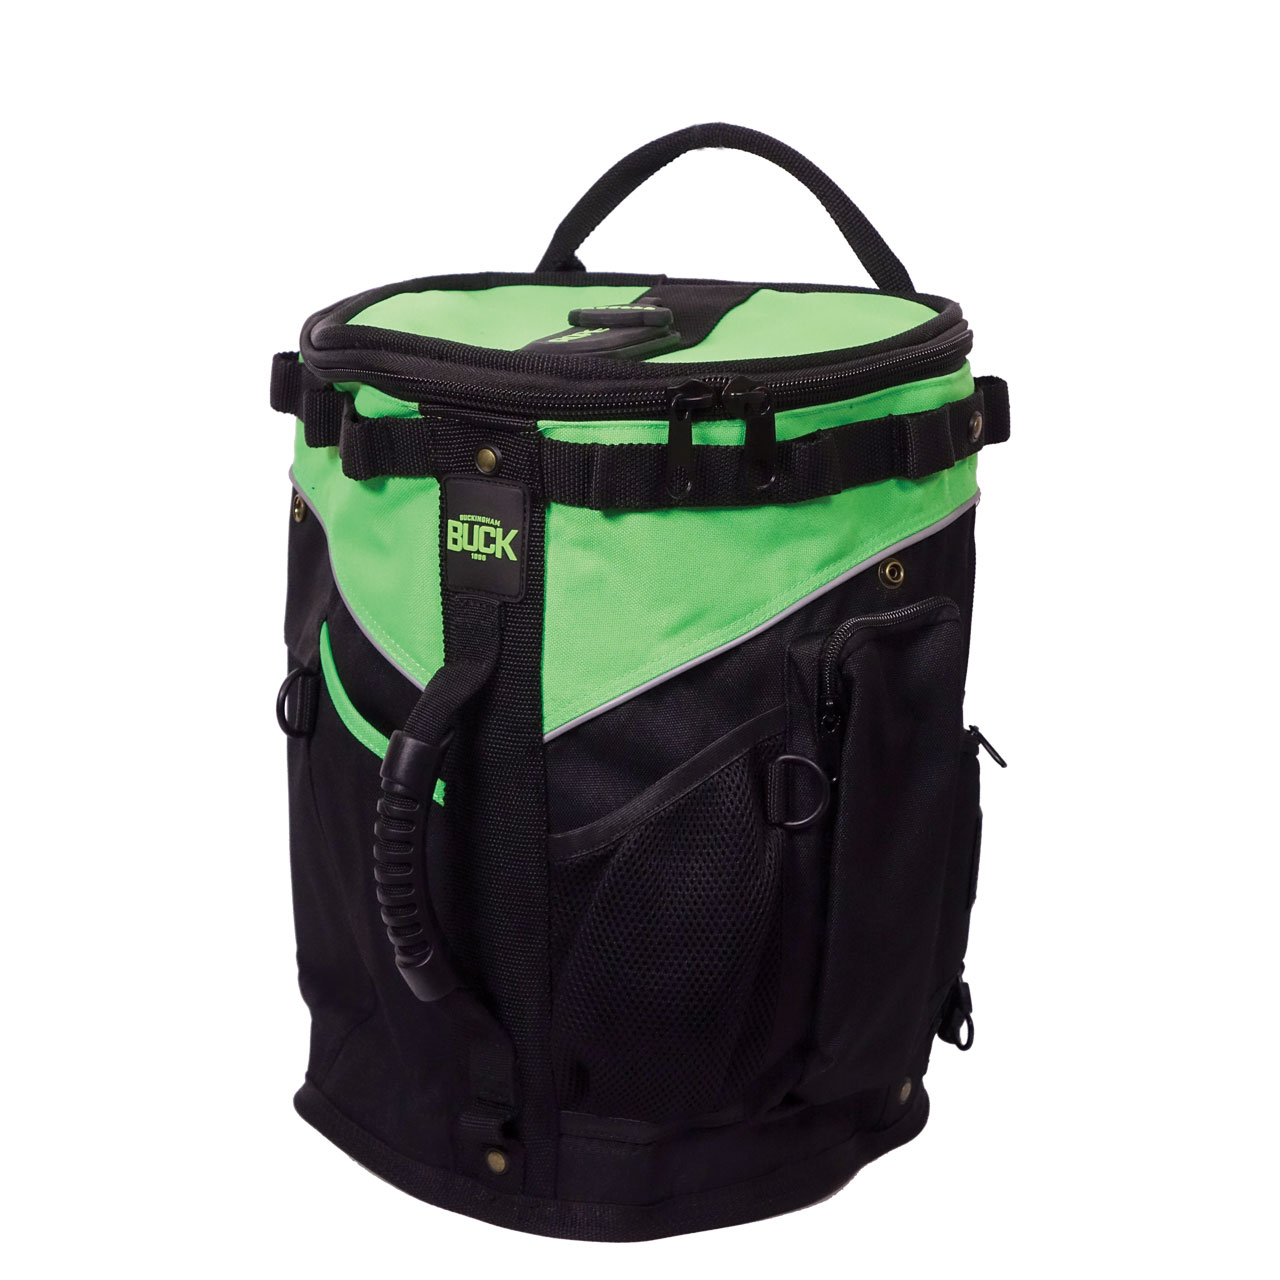 BAG, ROPEPRO DELUXE LG